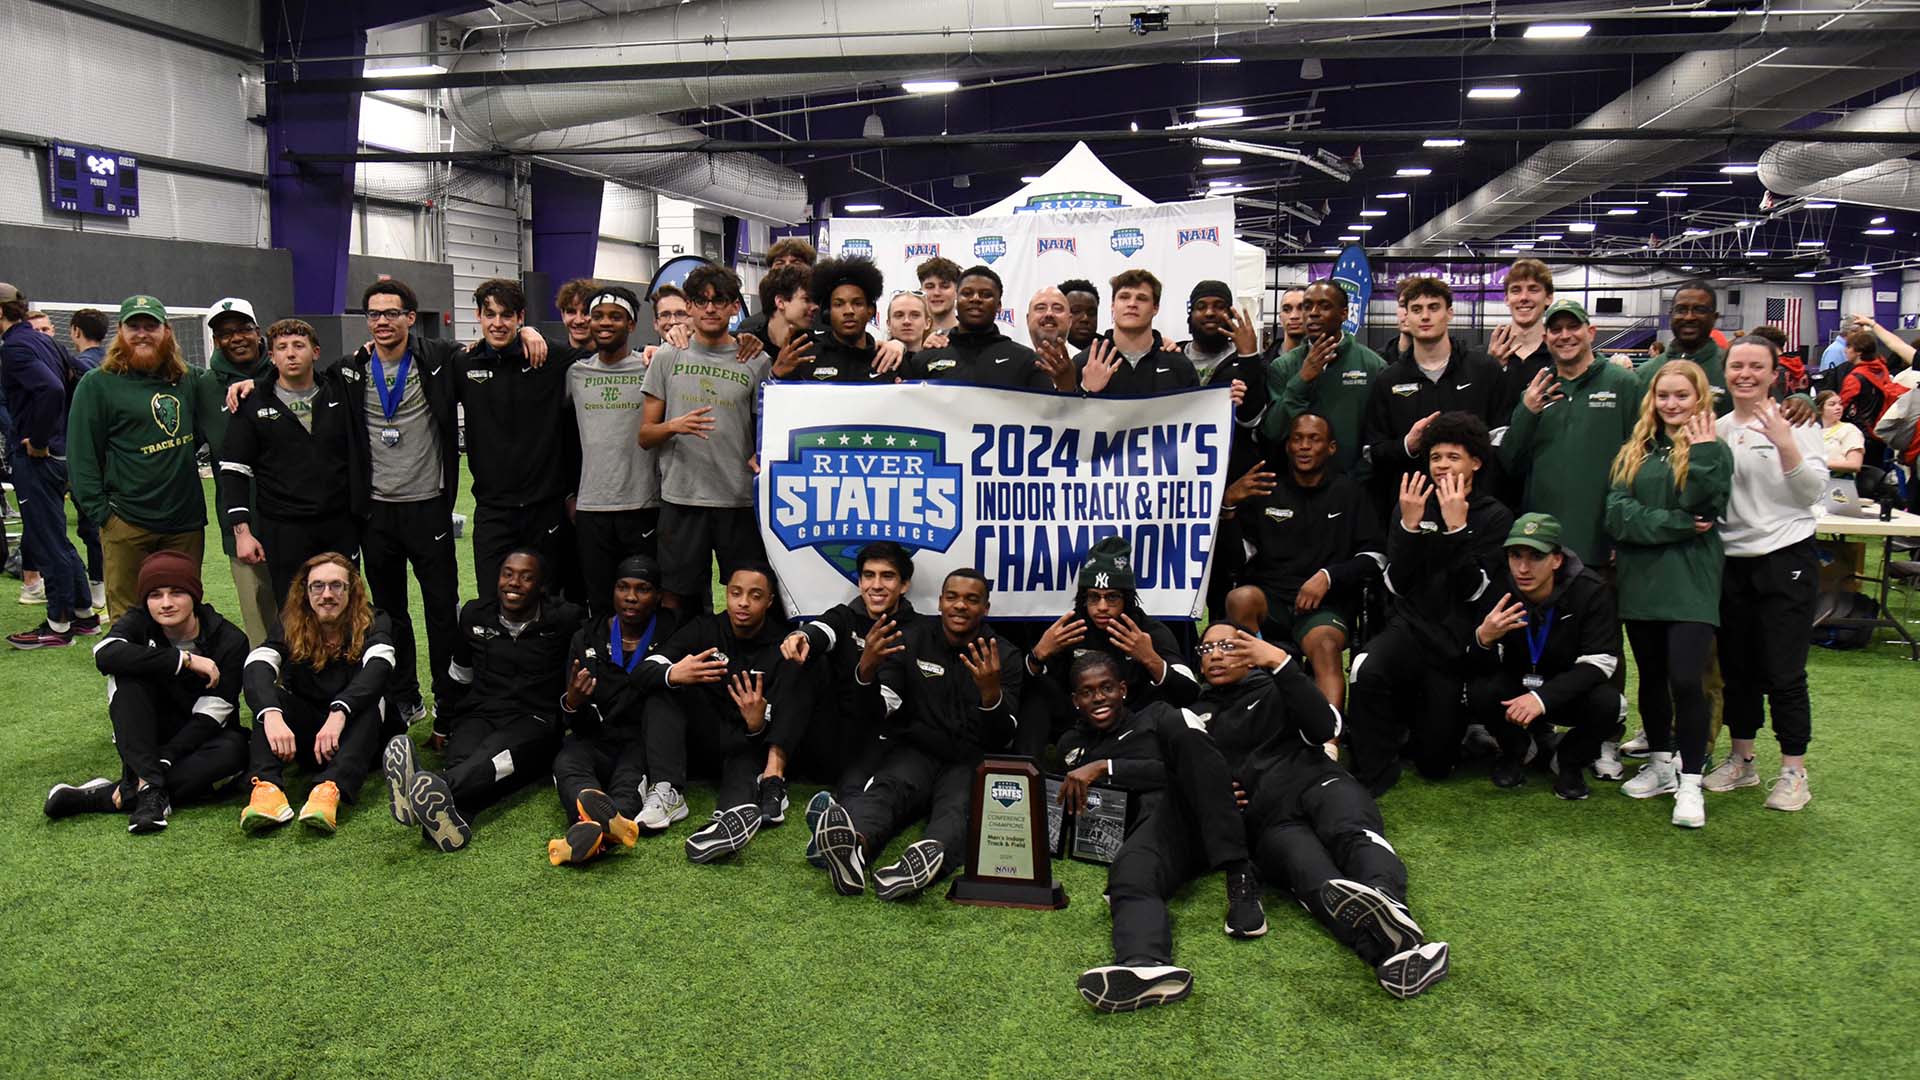 Point Park wins 4th straight RSC Men's Indoor Track & Field Championship title